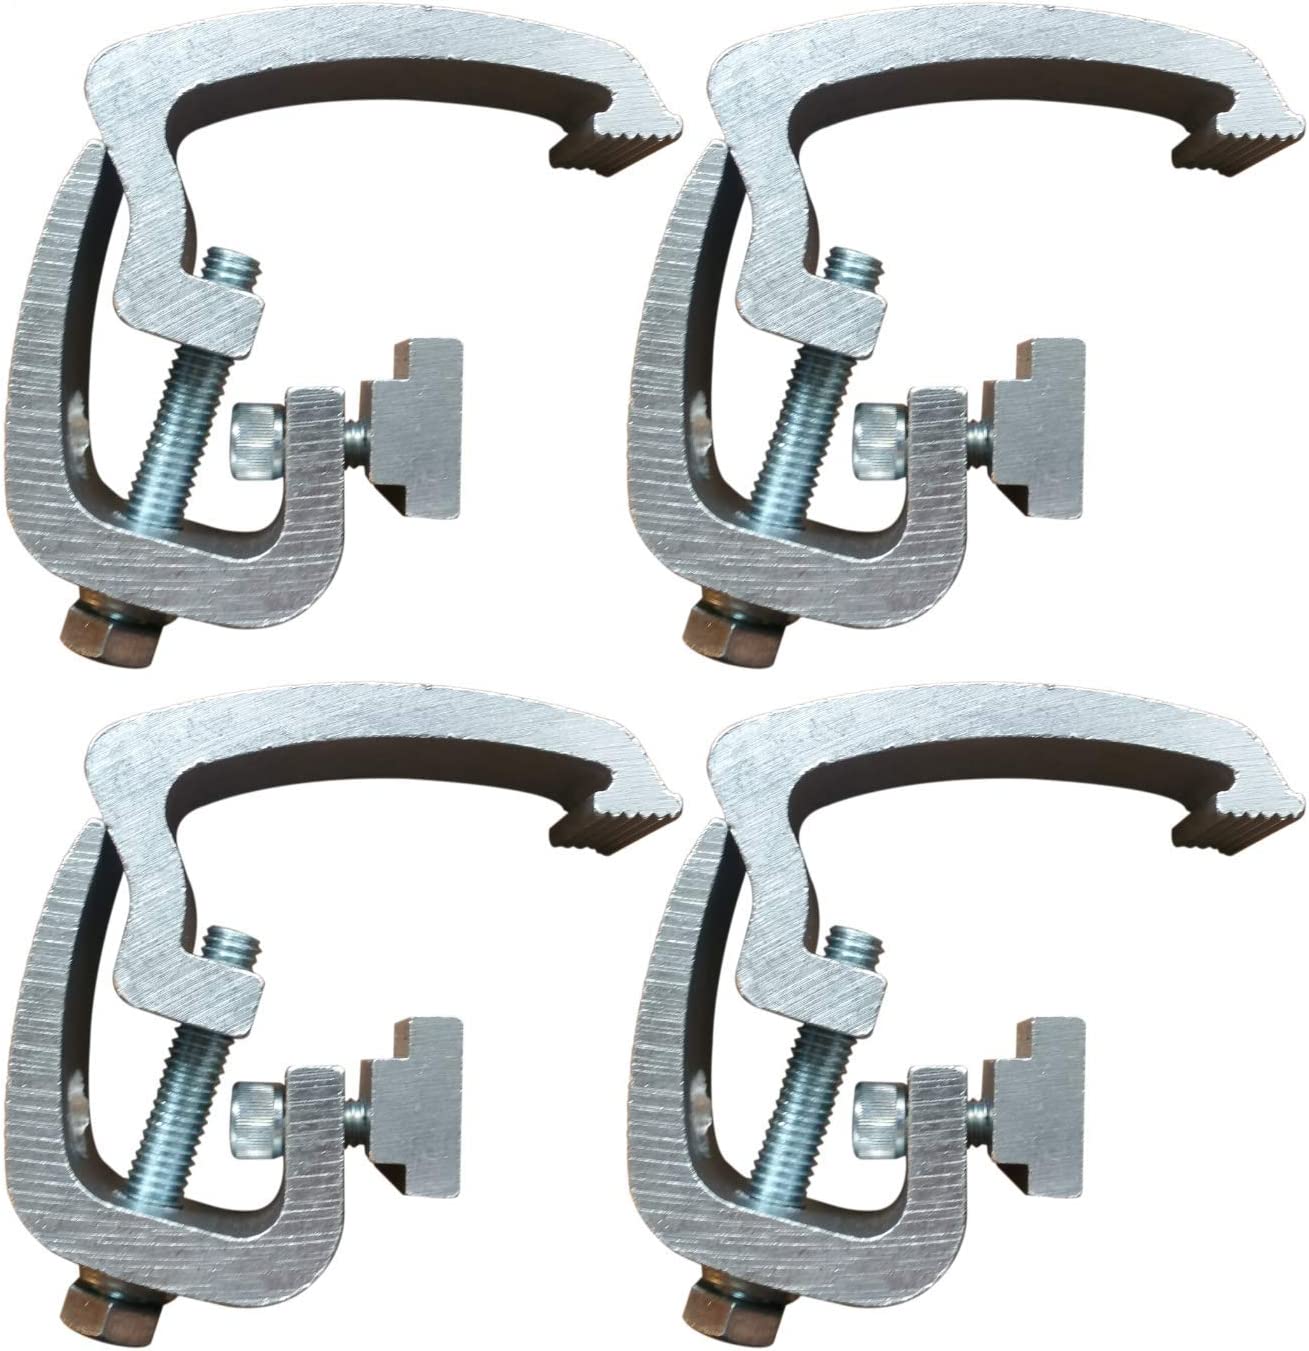 API Clamps (4 Pack) Toyota Tacoma - To Install bed Rack WITHOUT bed Rack Adaptor Kit